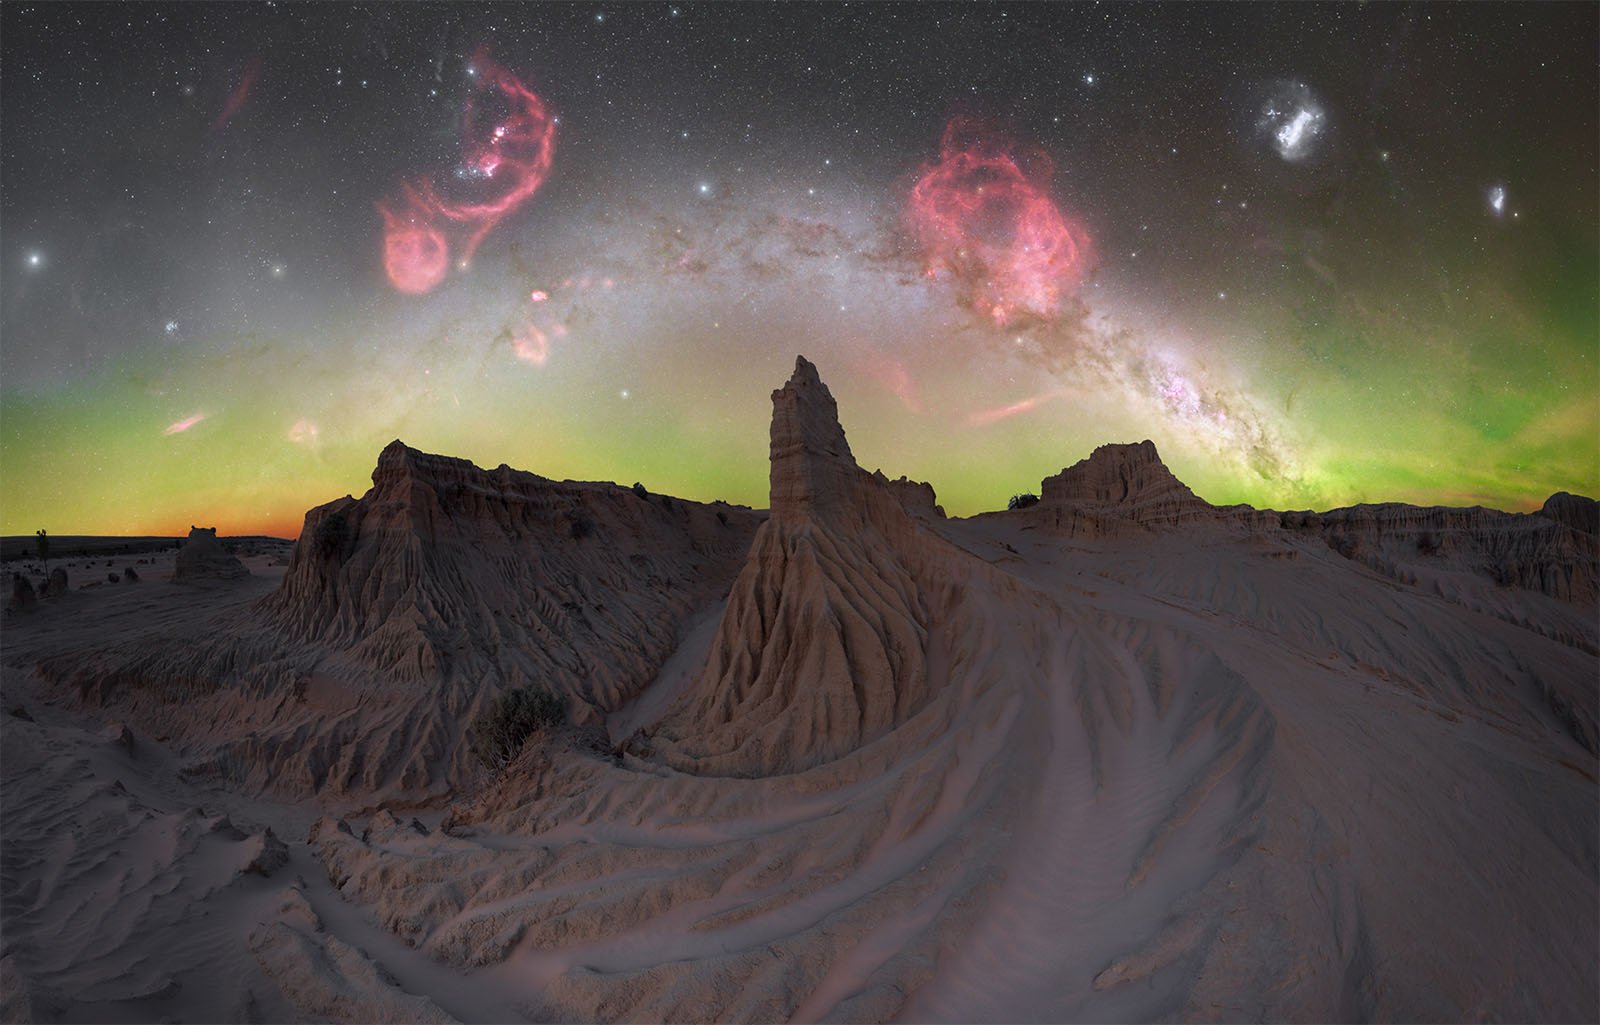 A breathtaking night-time landscape of a desert with prominent rock formations in the foreground. The sky features a stunning display of stars, vibrant pink and red nebulae, and faint green auroras illuminating the horizon, creating a surreal celestial scene.